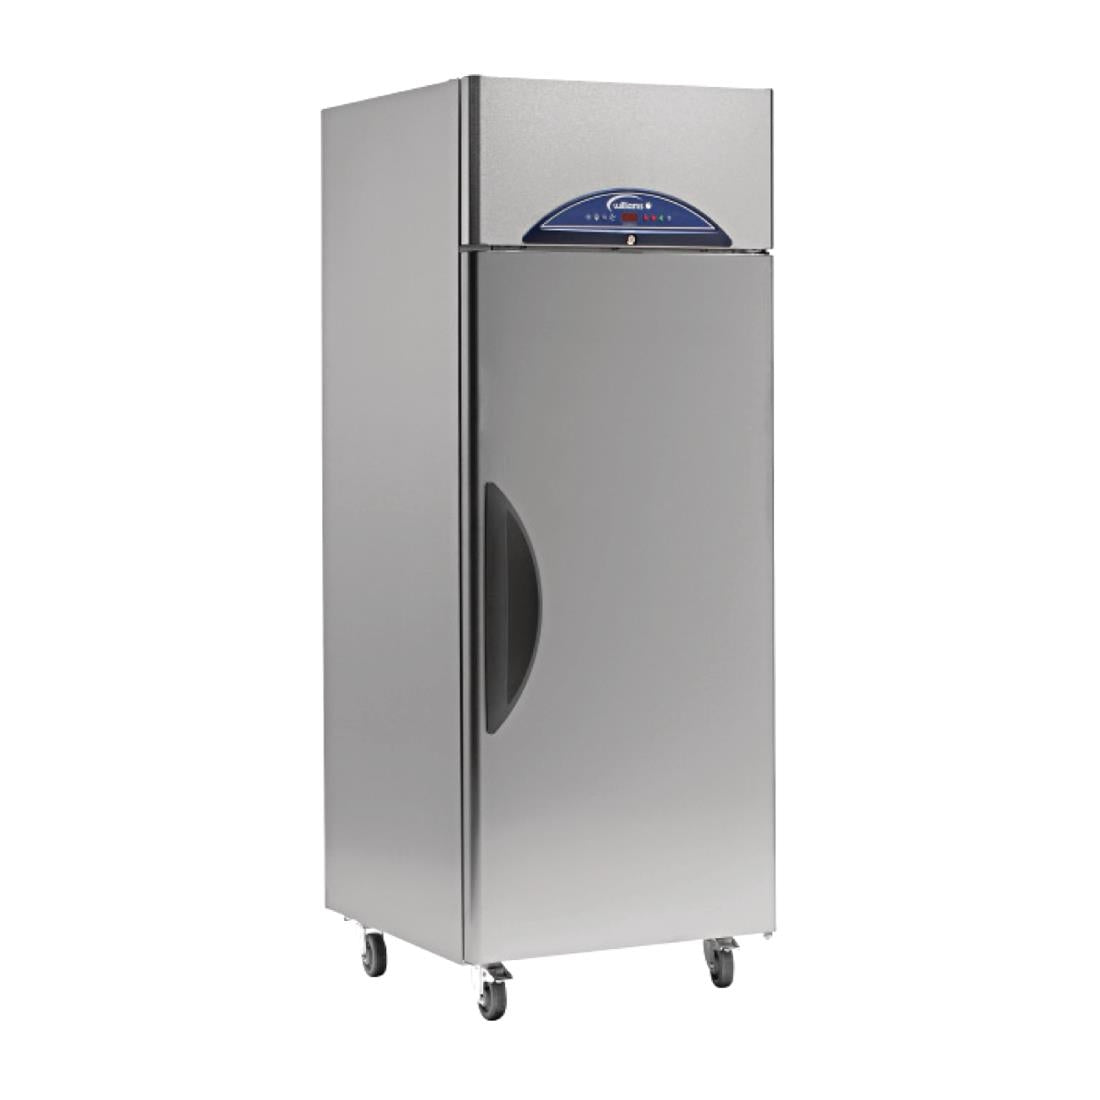 FD385 Williams Crystal Bakery Freezer LC1T-SA JD Catering Equipment Solutions Ltd